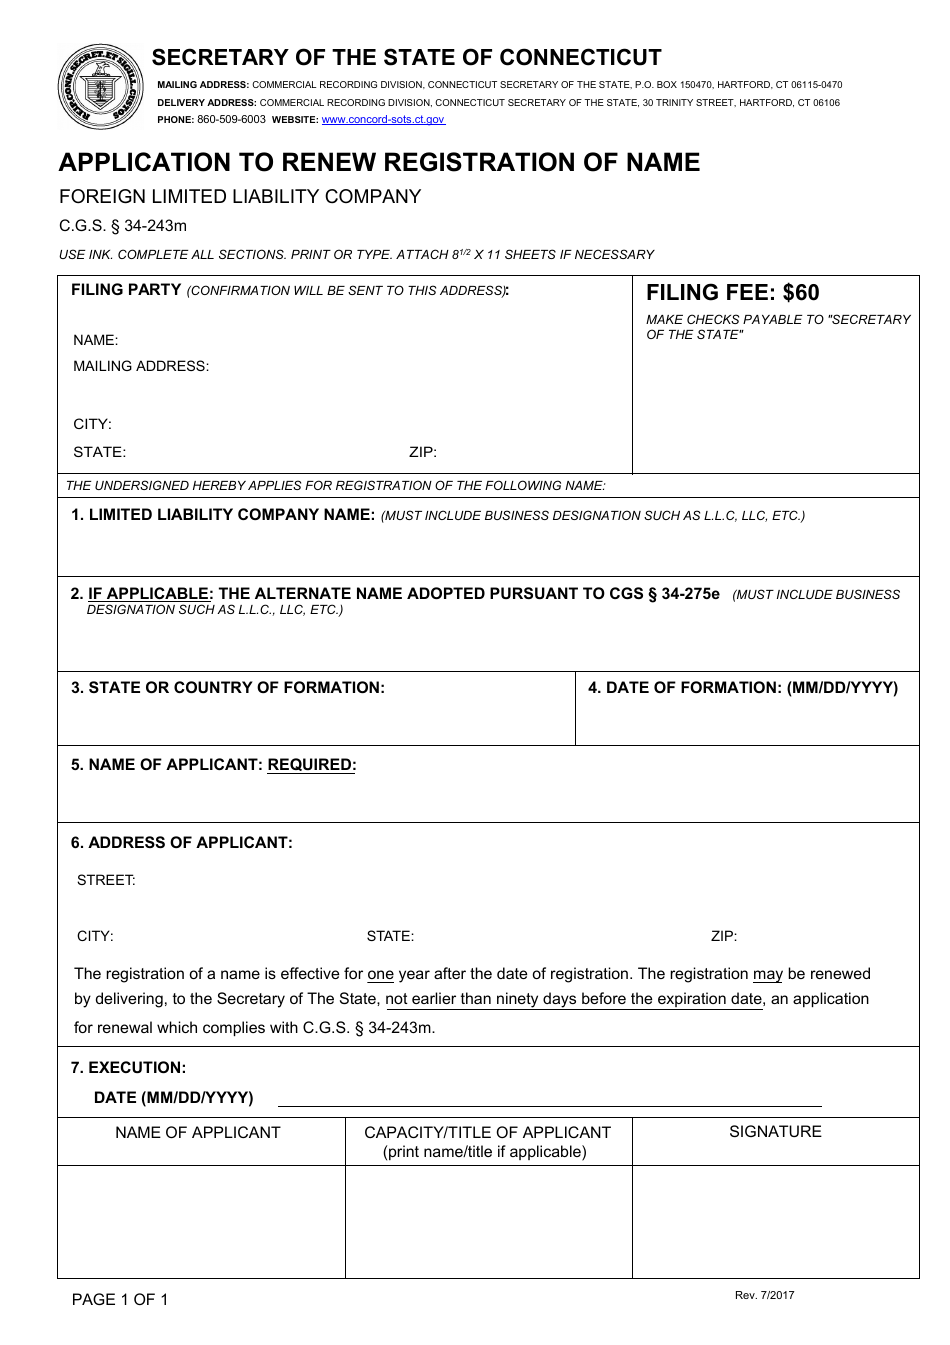 Application to Renew Registration of Name - Foreign Limited Liability Company - Connecticut, Page 1